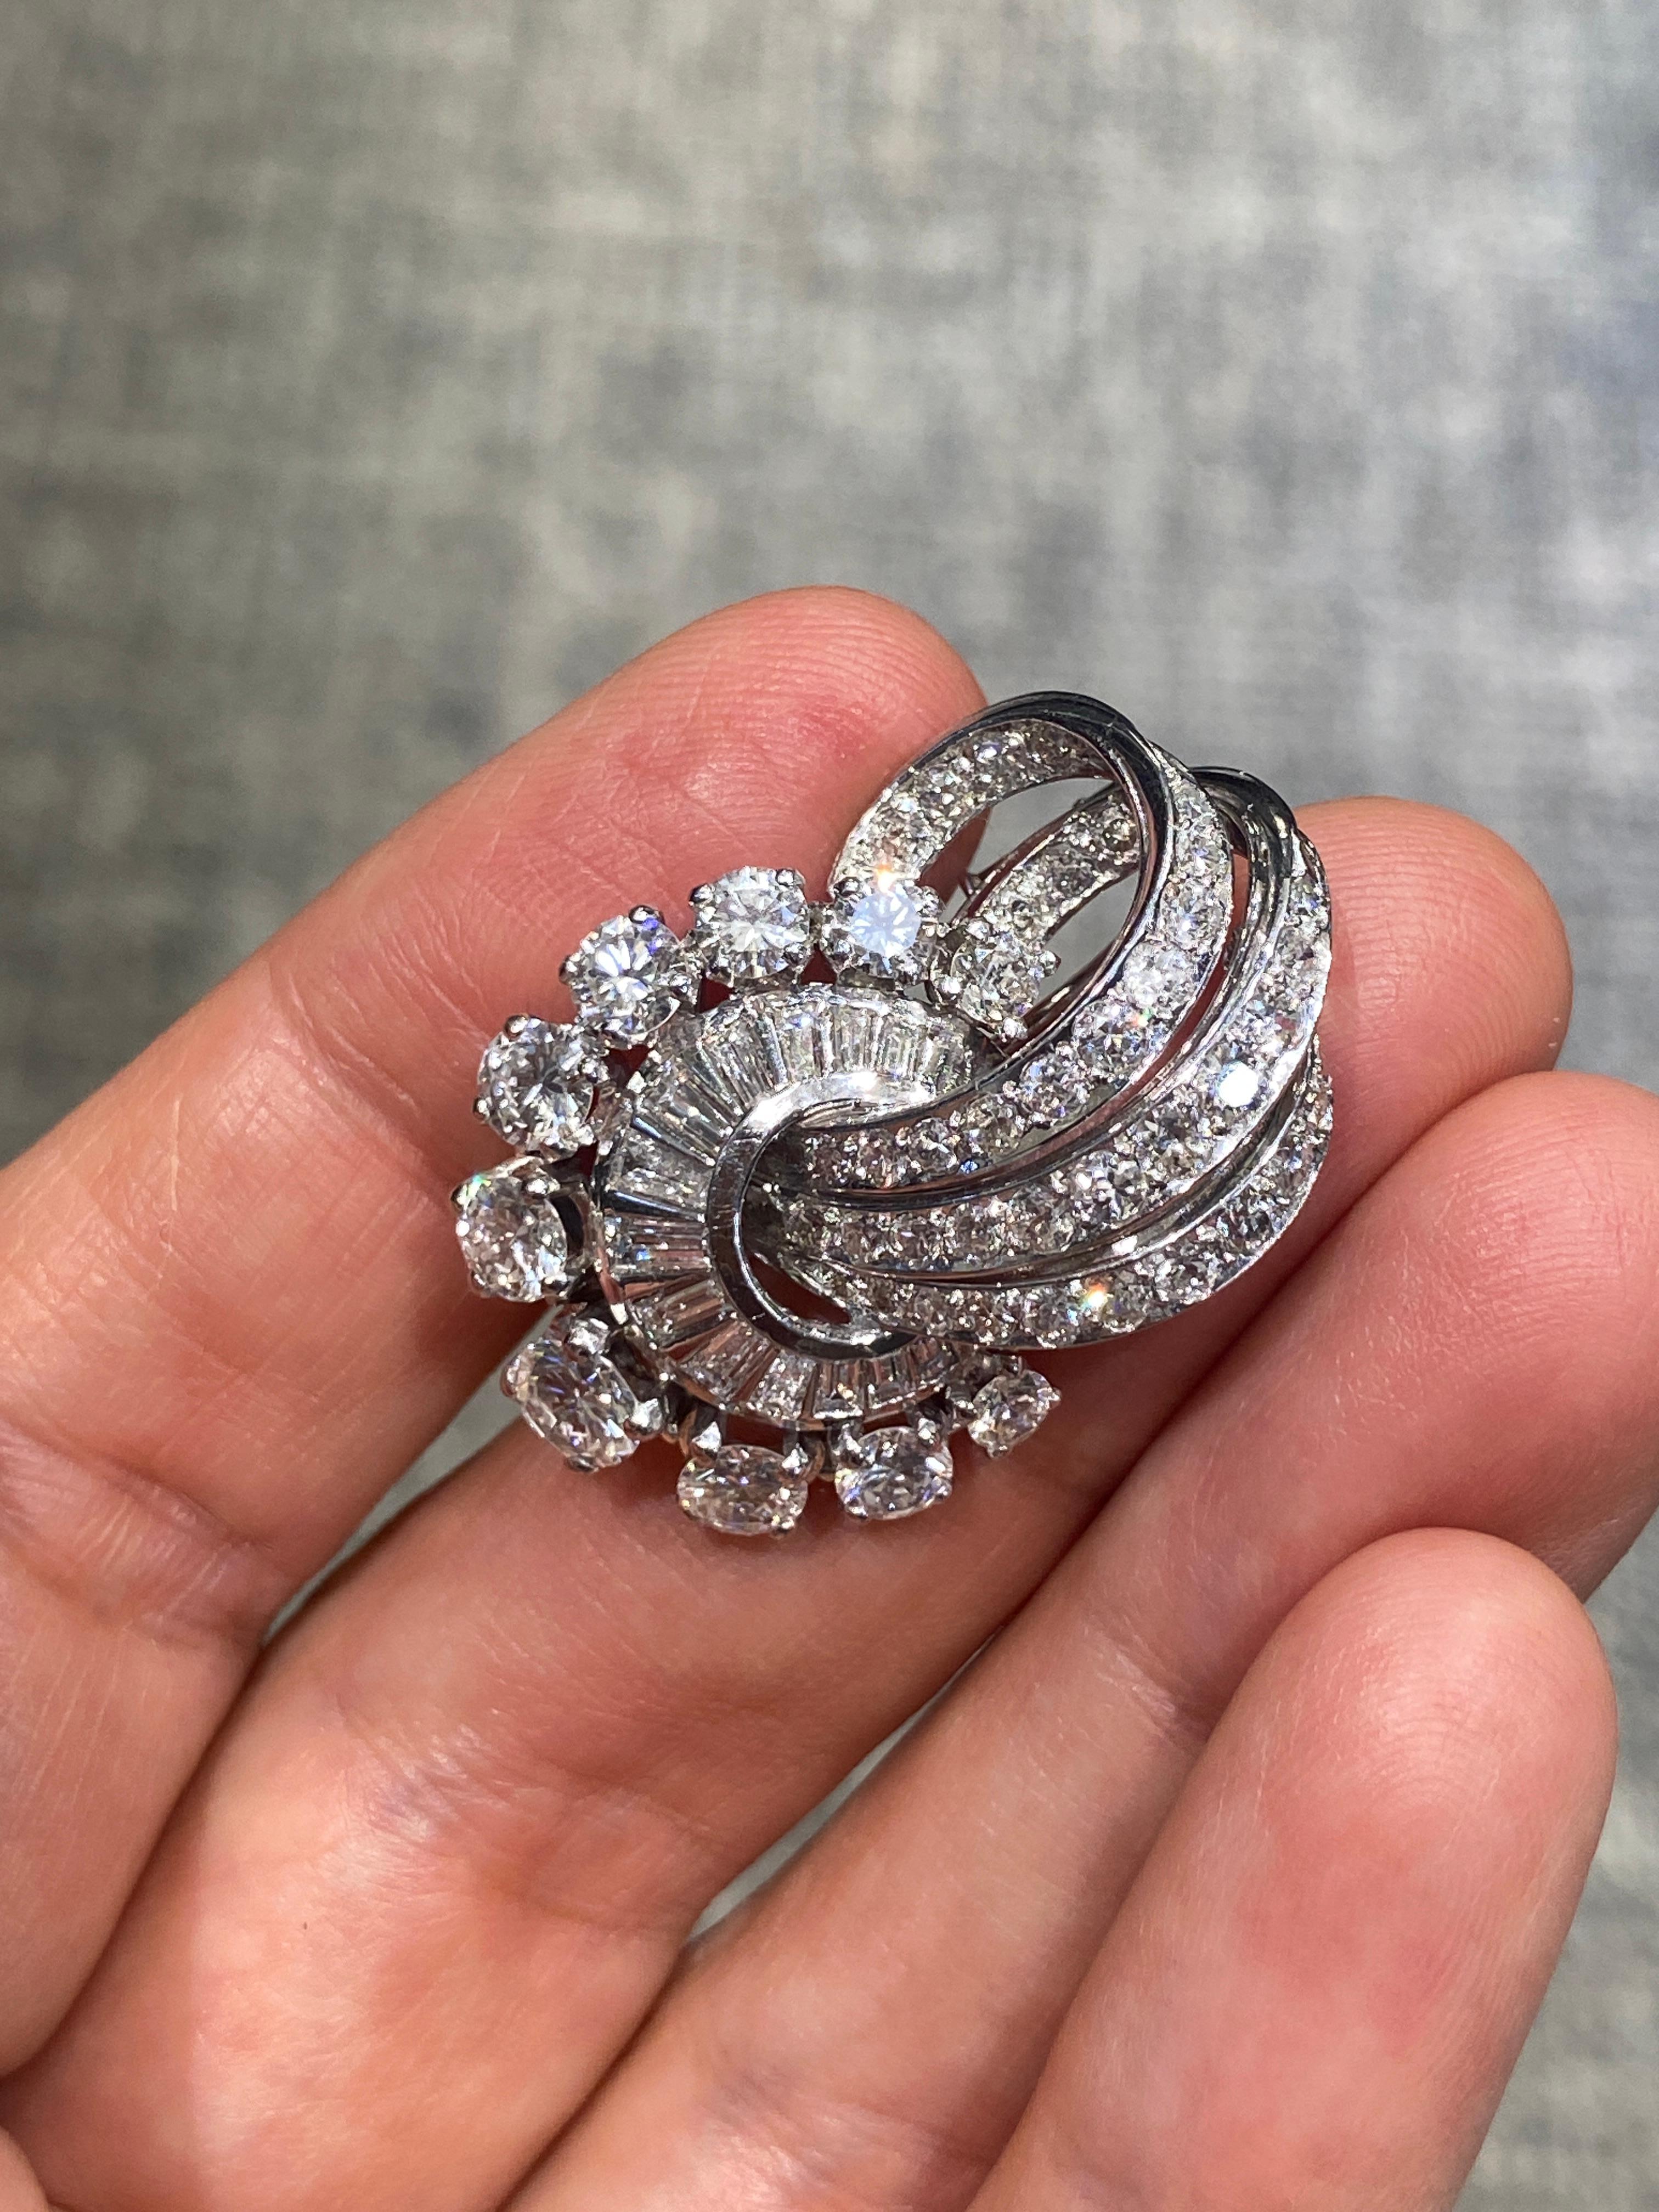 This charming 1940s French diamond brooch is made of platinum and adorned with approximately 4 carats of F colour VS2 clarity old European cut diamonds. It is a delight to behold.